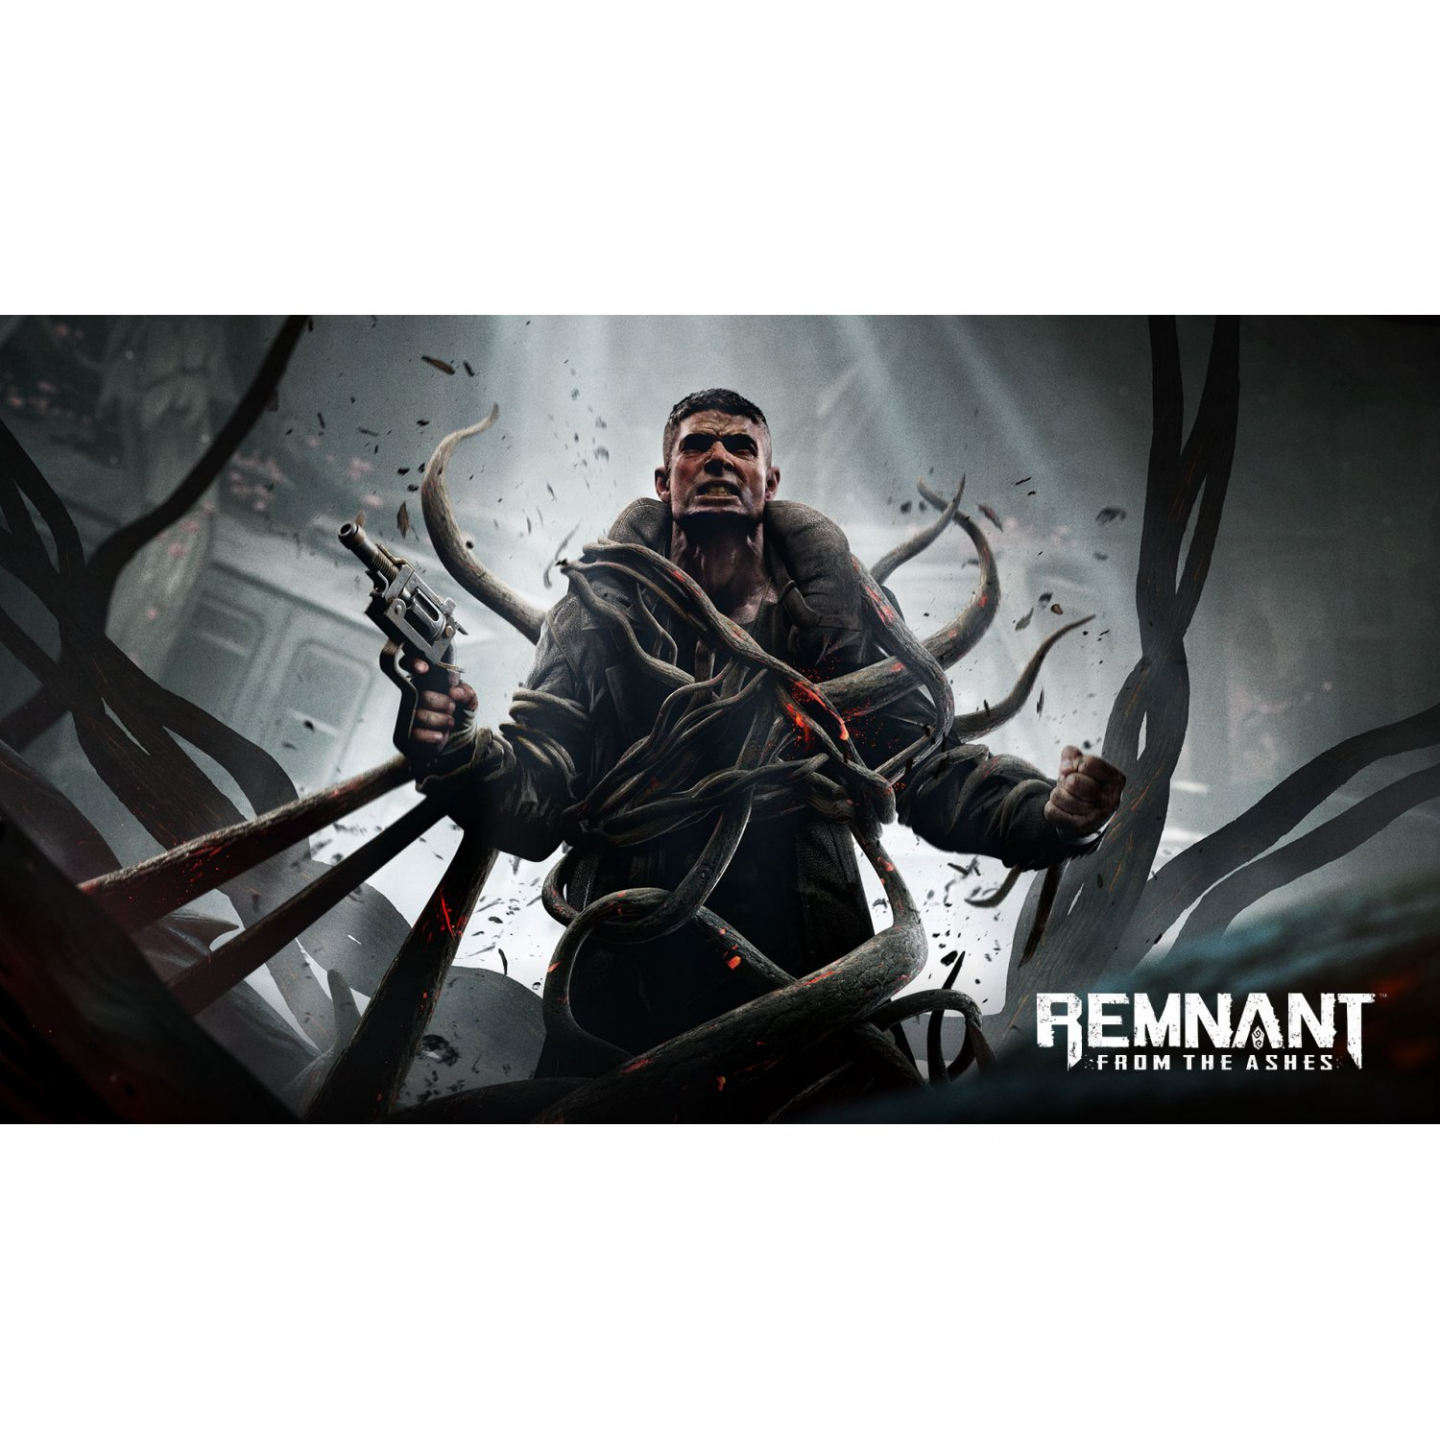 Remnant: From the Ashes Wallpapers